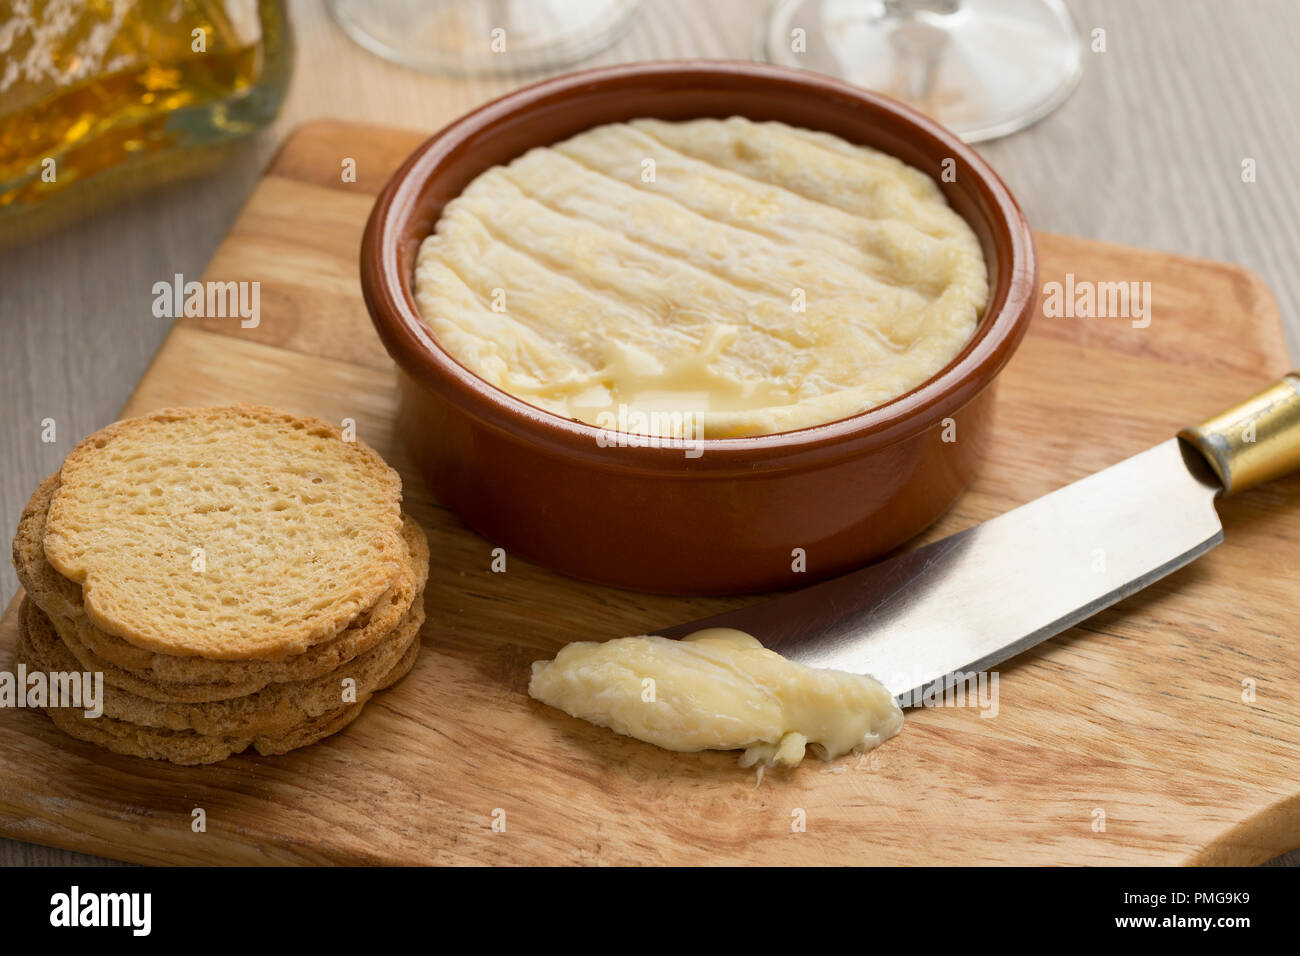 Brown bowl with soft French Saint Marcellin cheese made from cows milk Stock Photo